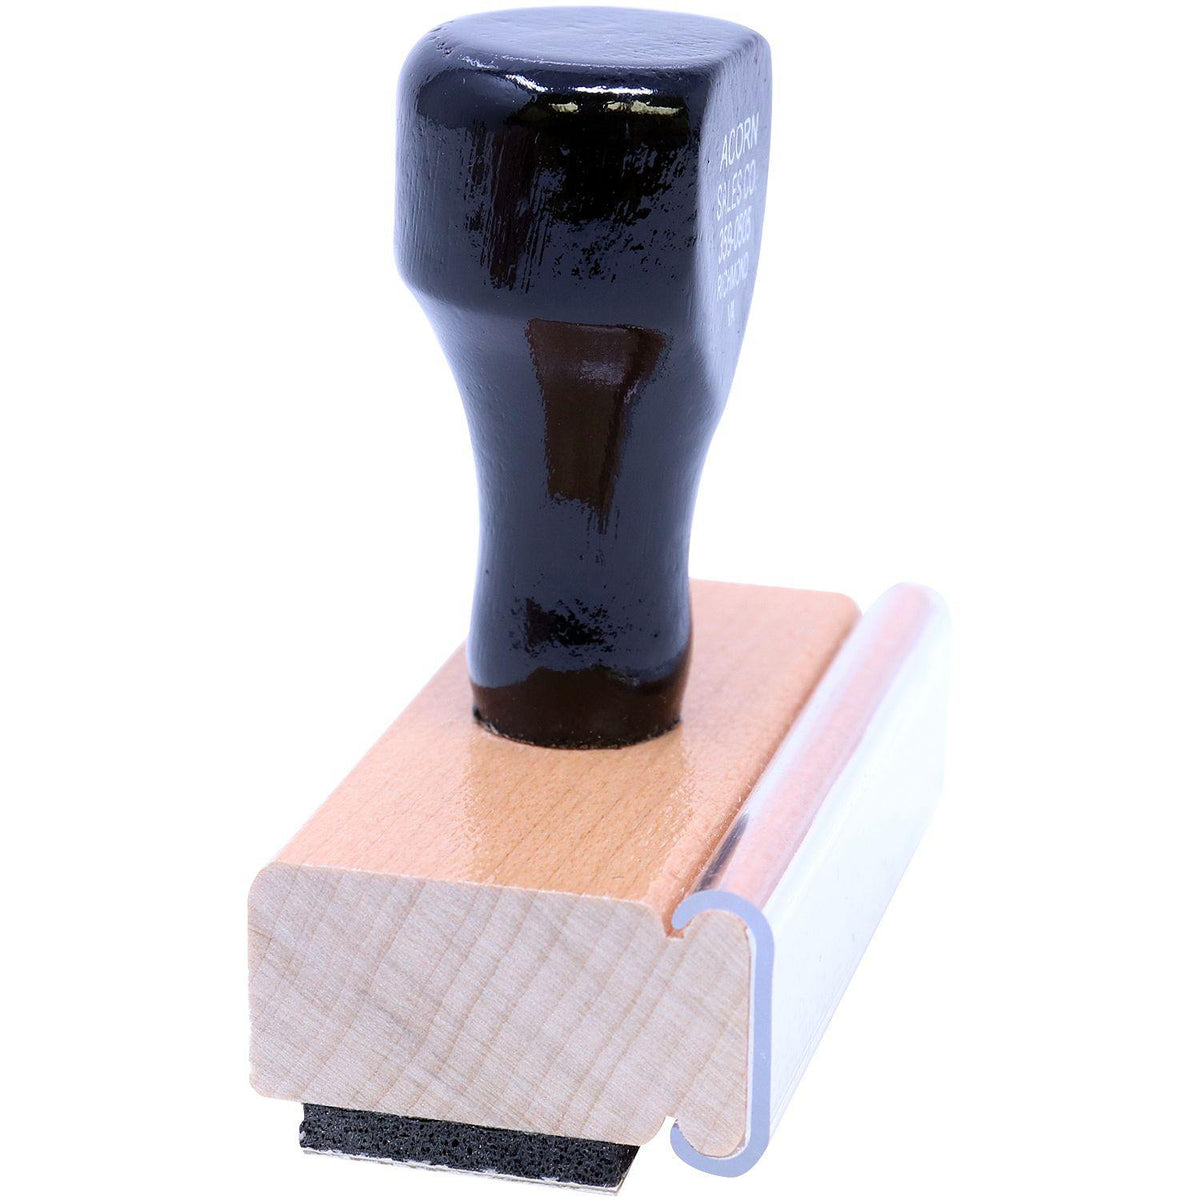 Legal Witness Rubber Stamp - Engineer Seal Stamps - Brand_Acorn, Impression Size_Small, Stamp Type_Regular Stamp, Type of Use_Legal